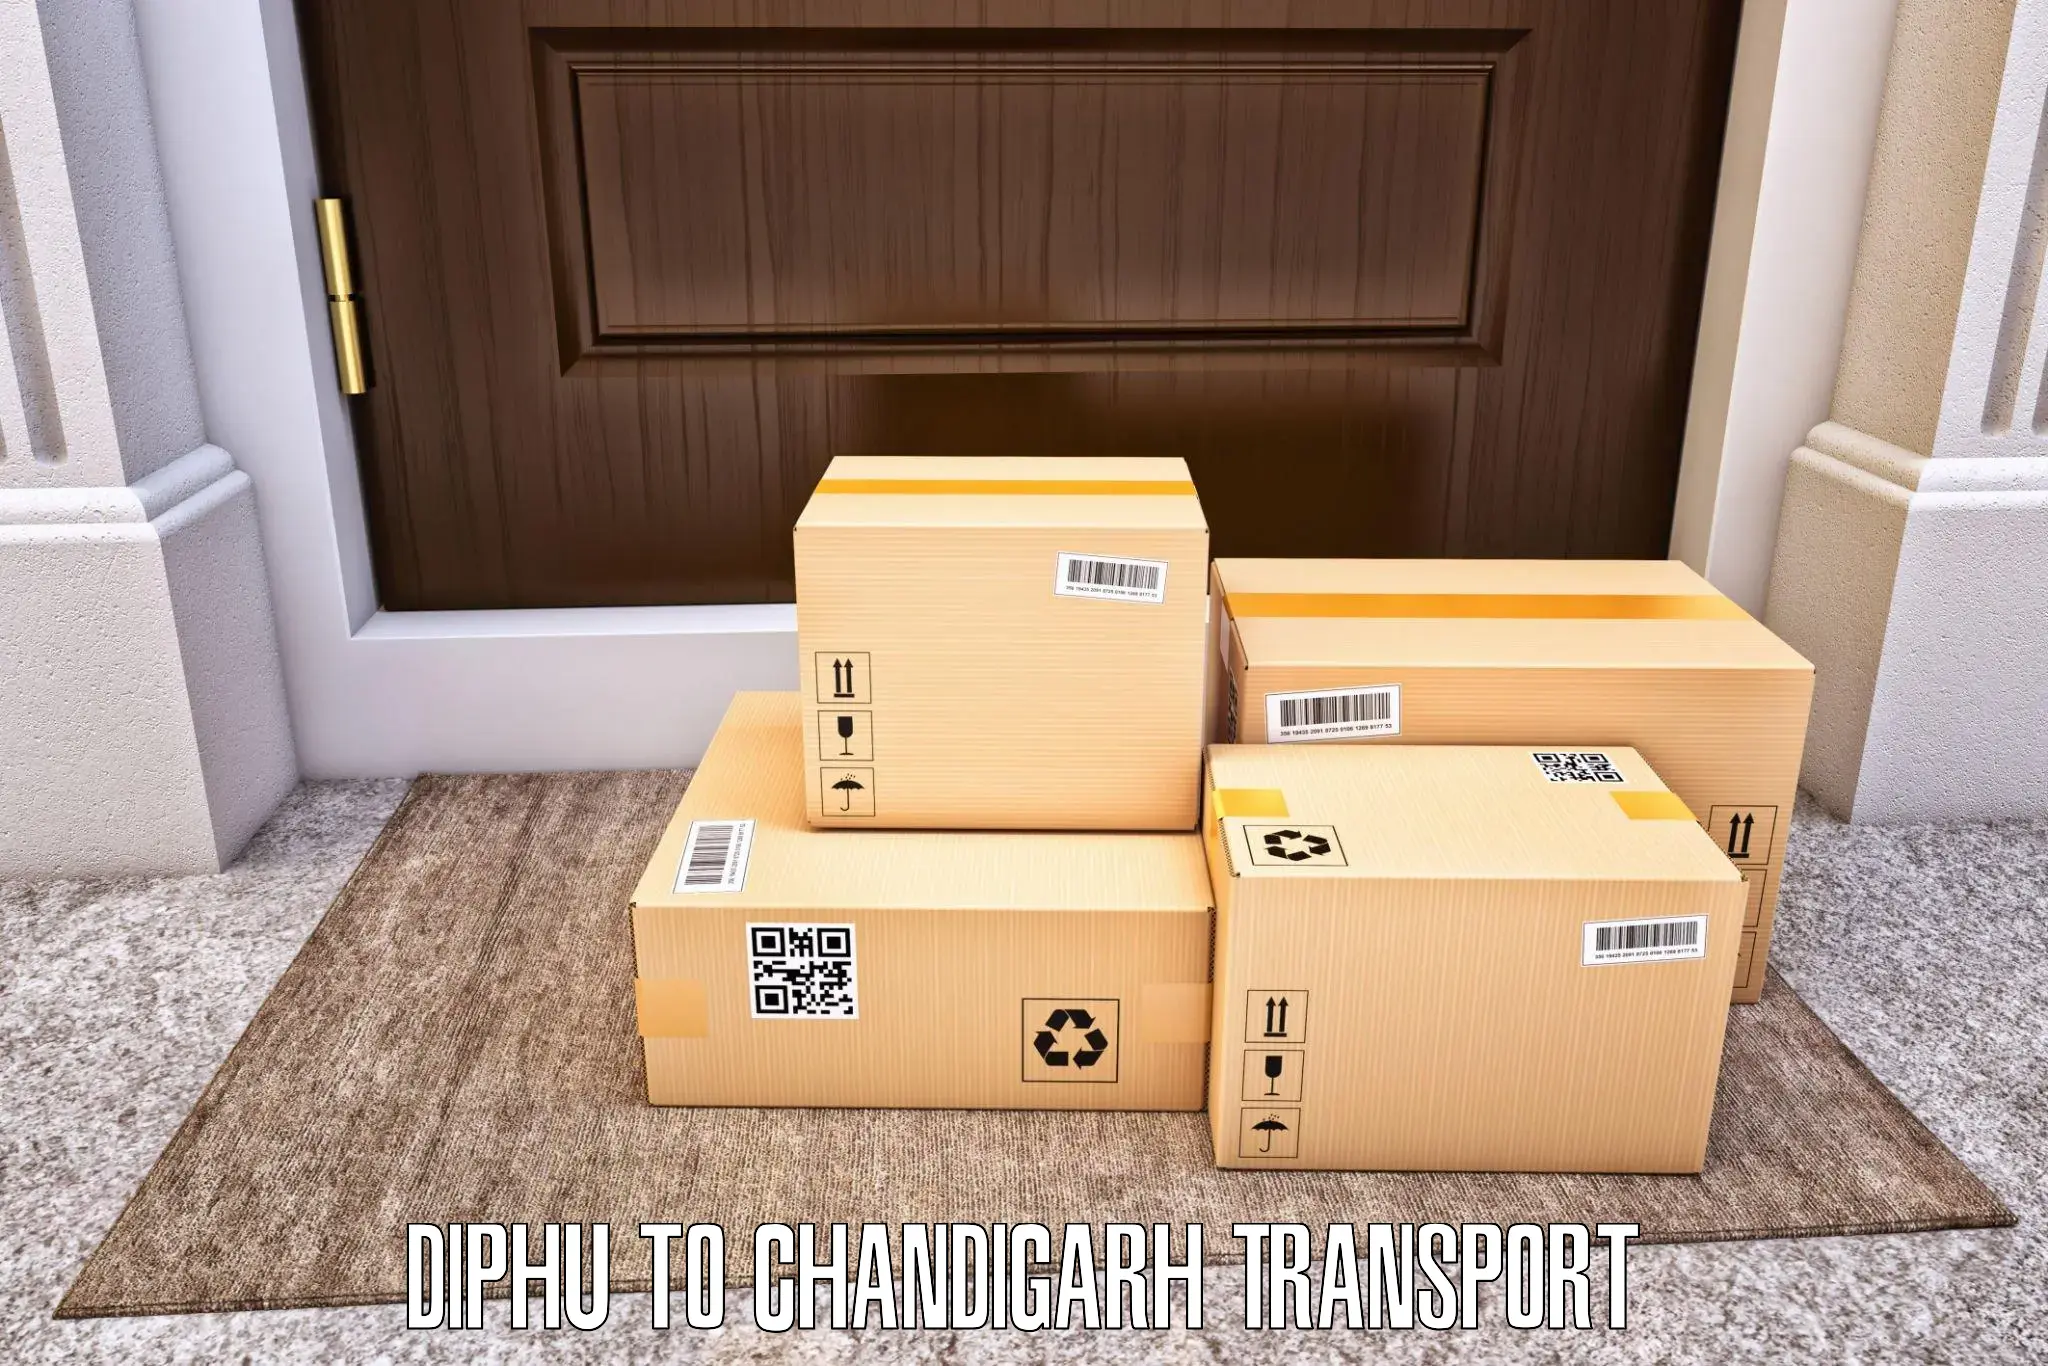 India truck logistics services Diphu to Chandigarh